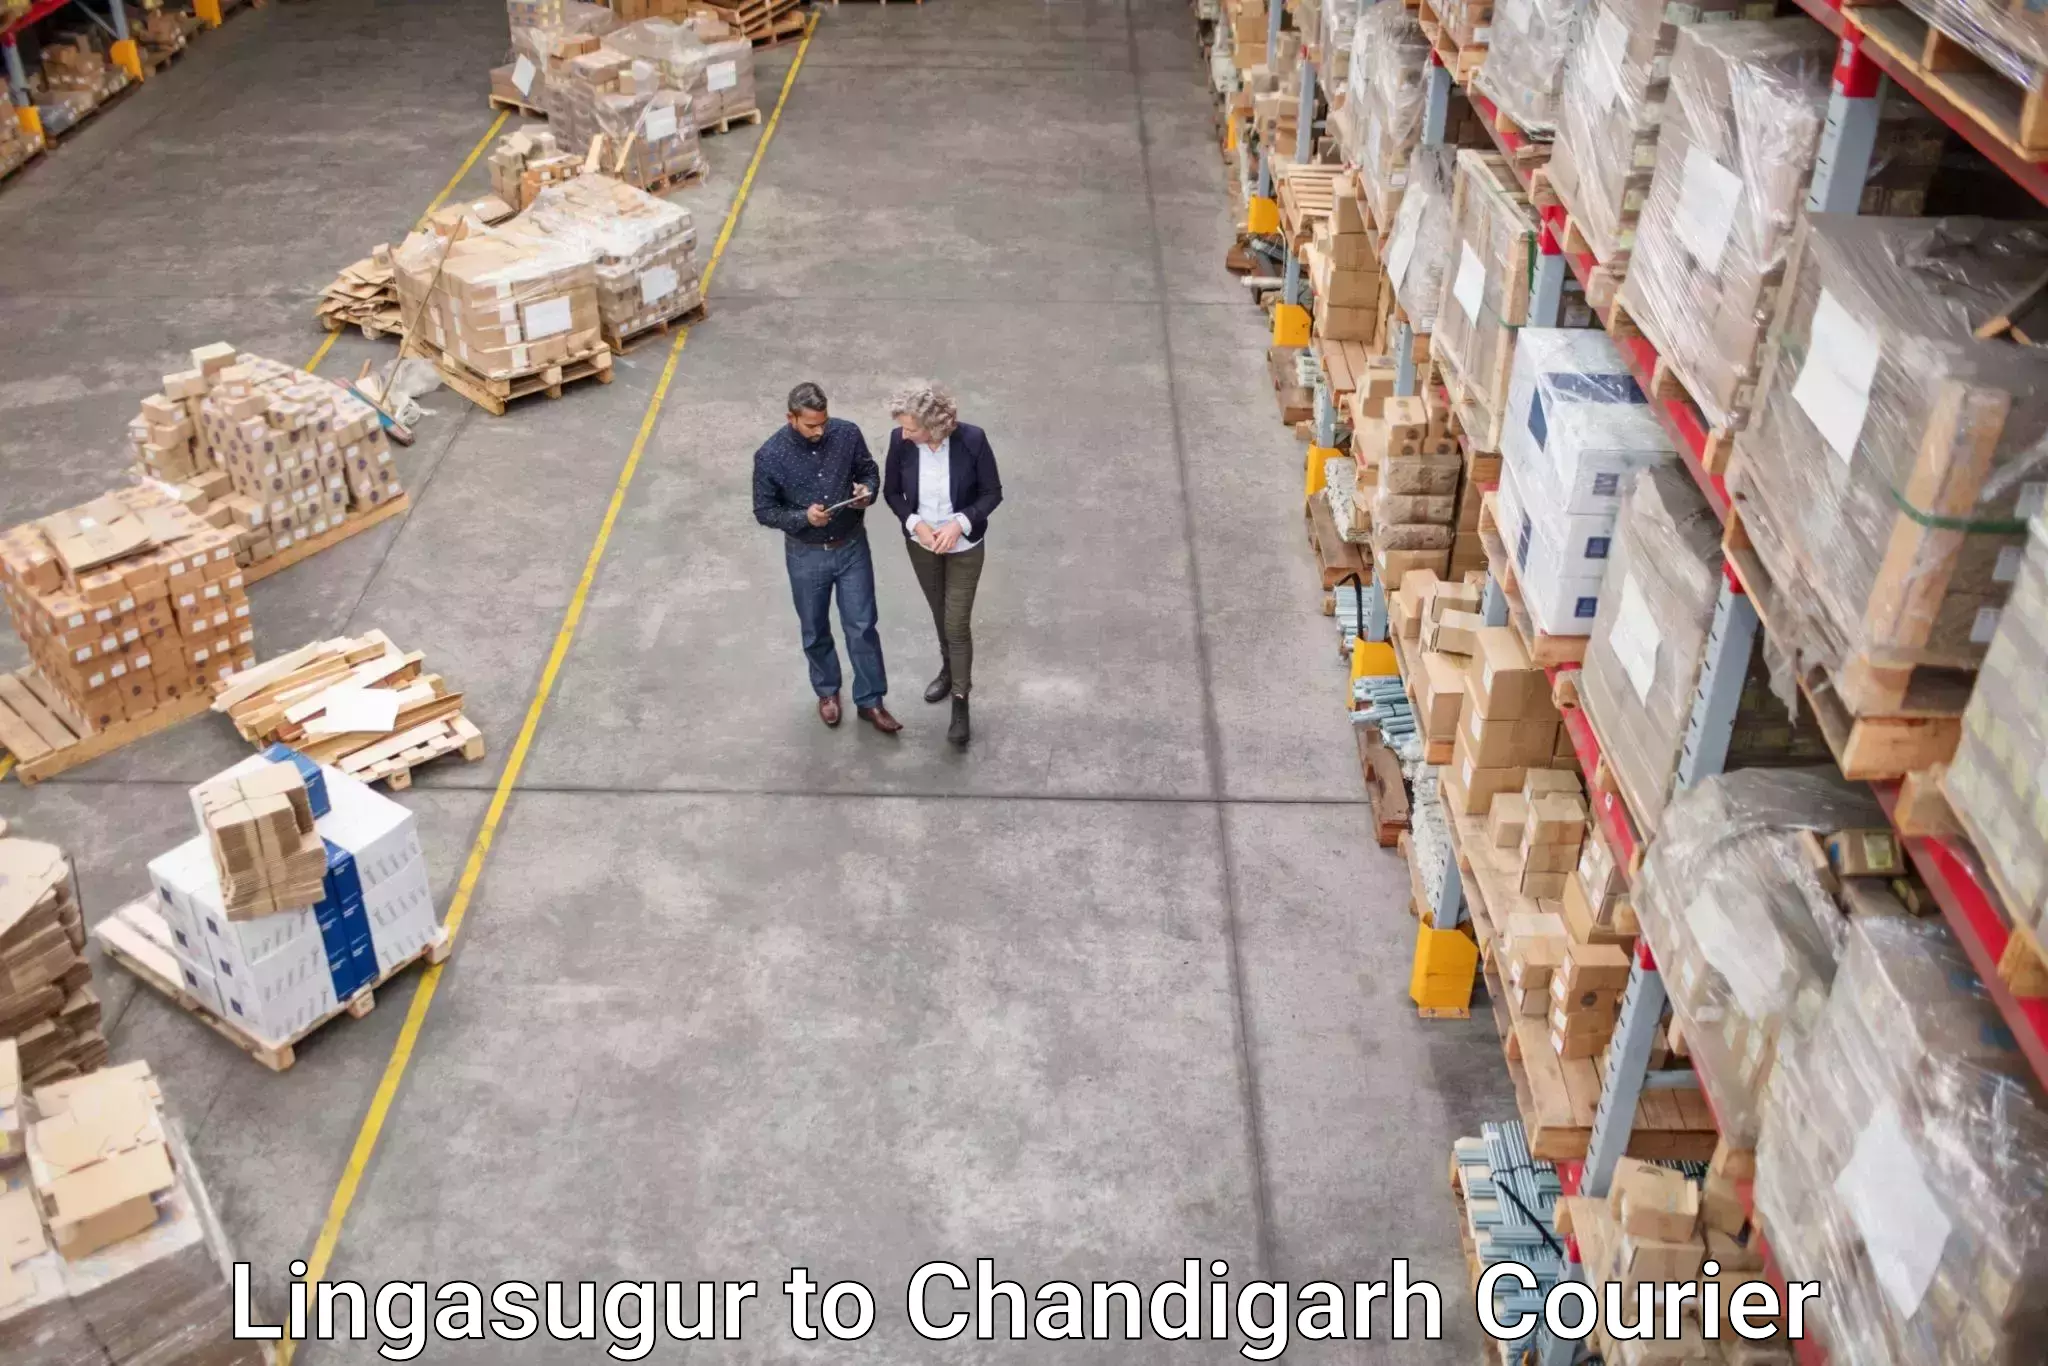 Multi-national courier services Lingasugur to Chandigarh